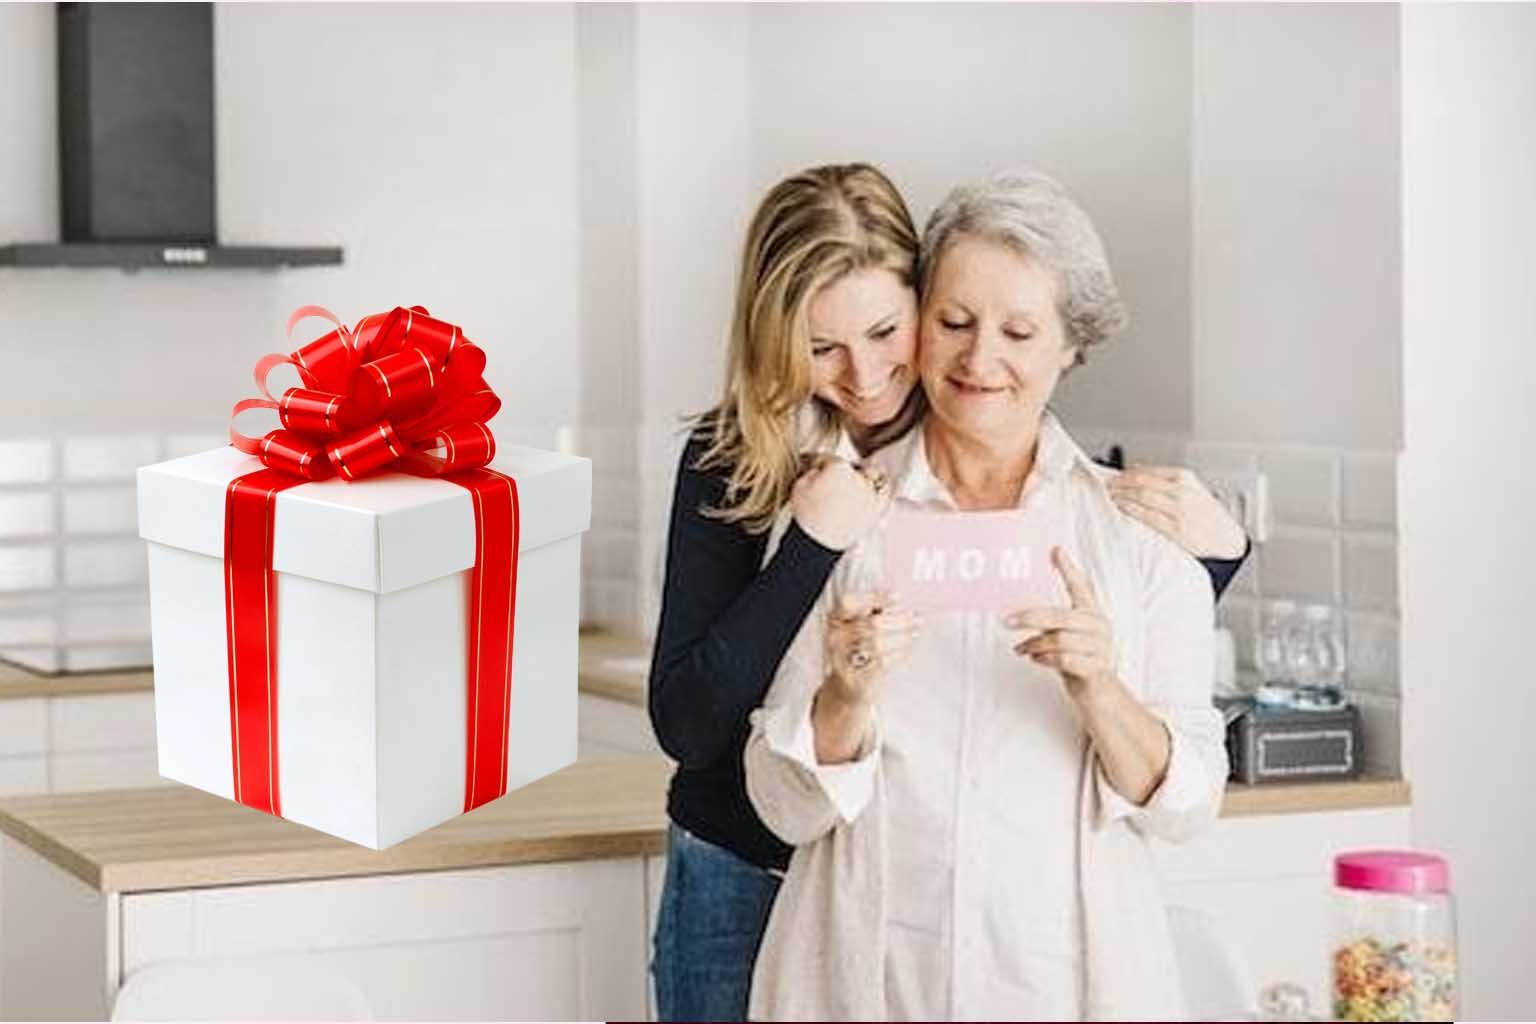 gift ideas to impress mother-in-law